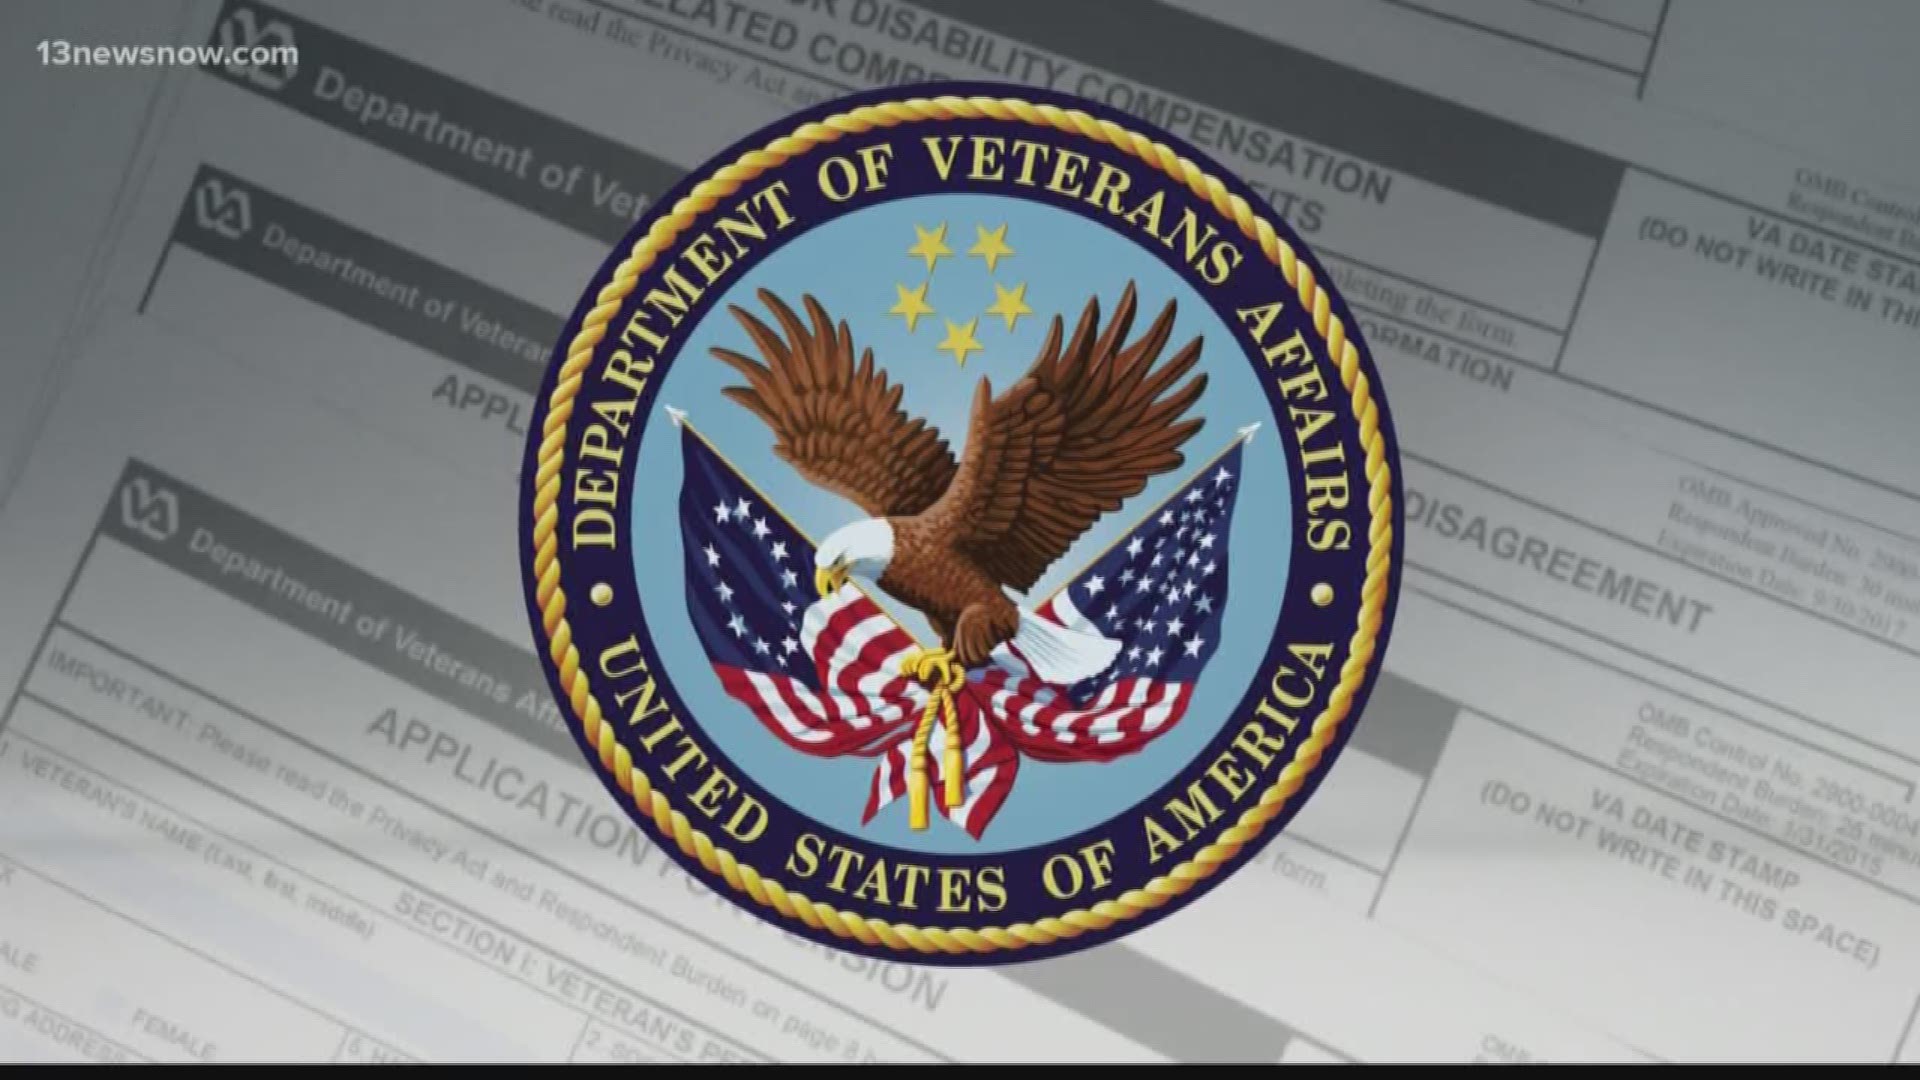 A new law will speed up appeals related to VA disability decisions and simplify the process.